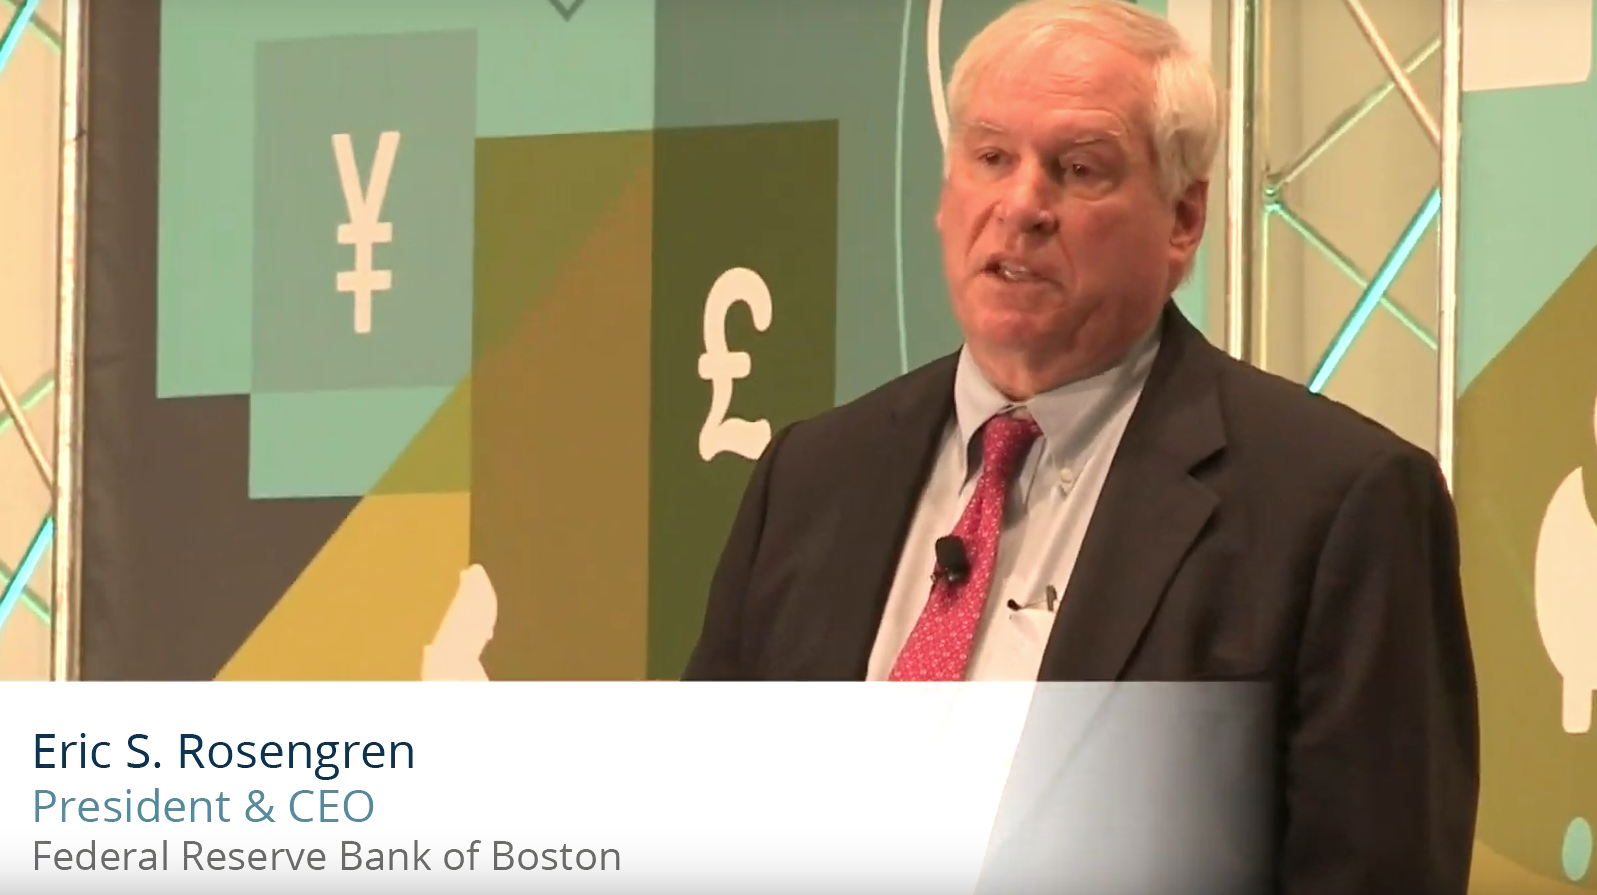 Rosengren is president and CEO of the Federal Reserve Bank of Boston Comments come via an interview he had with the Wall Street Journal 